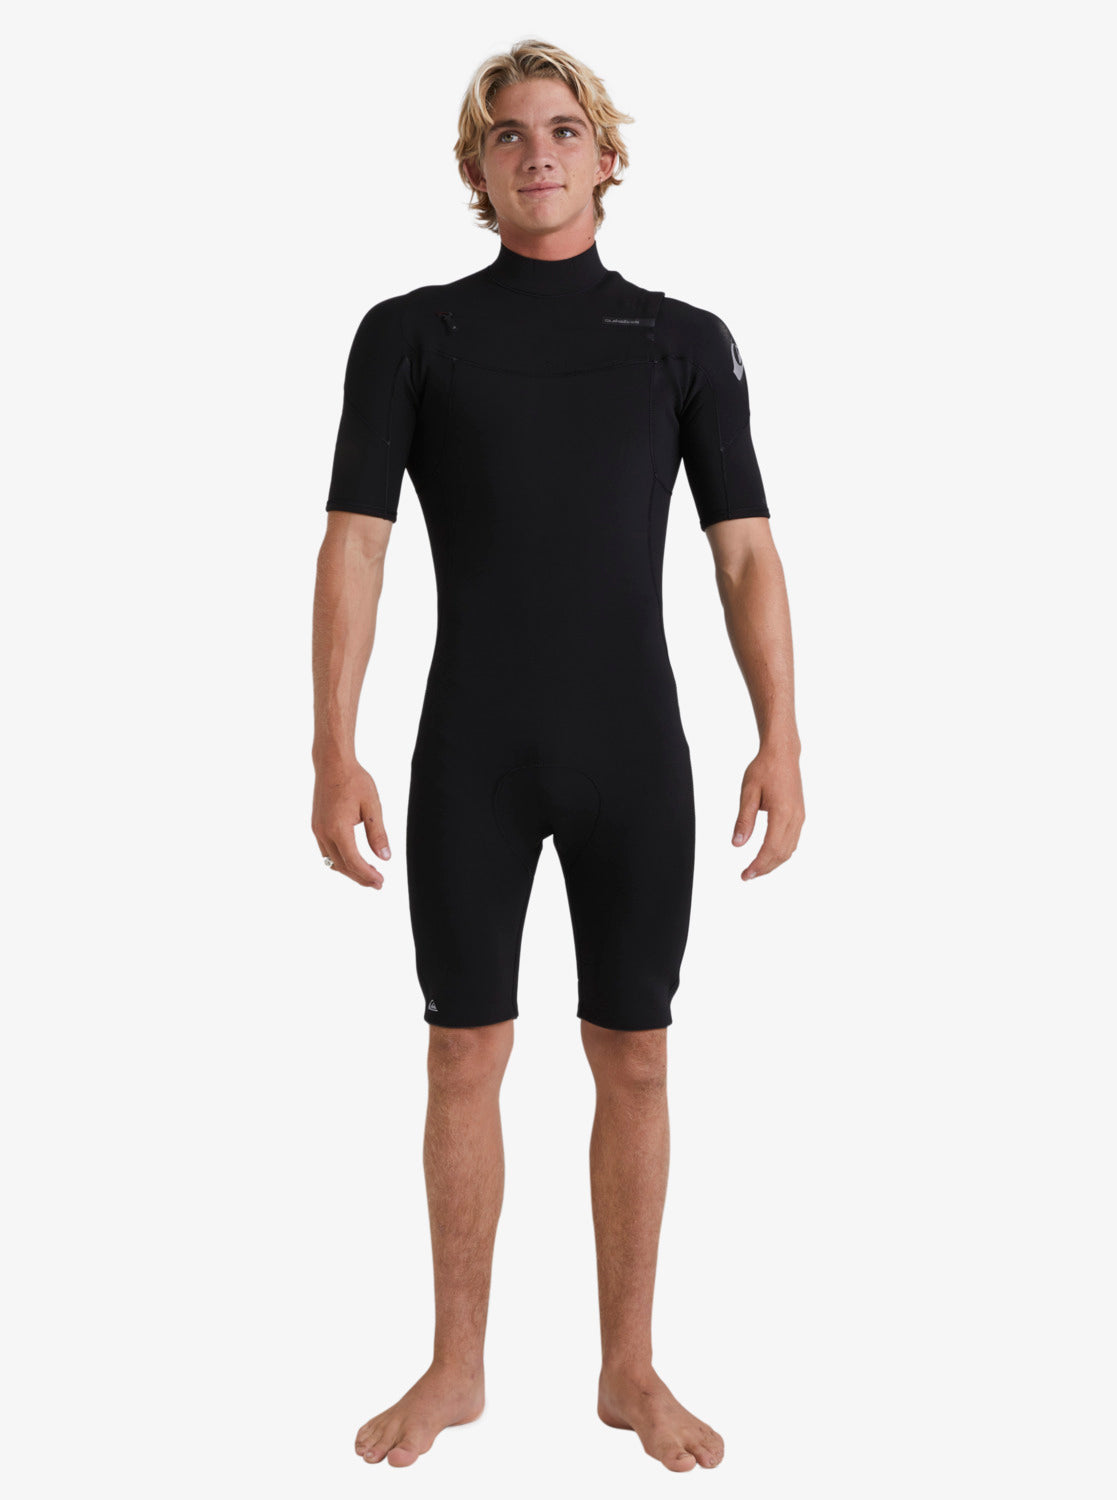 Quiksilver 2/2mm Everyday Sessions Short Sleeve Chest Zip Springsuit